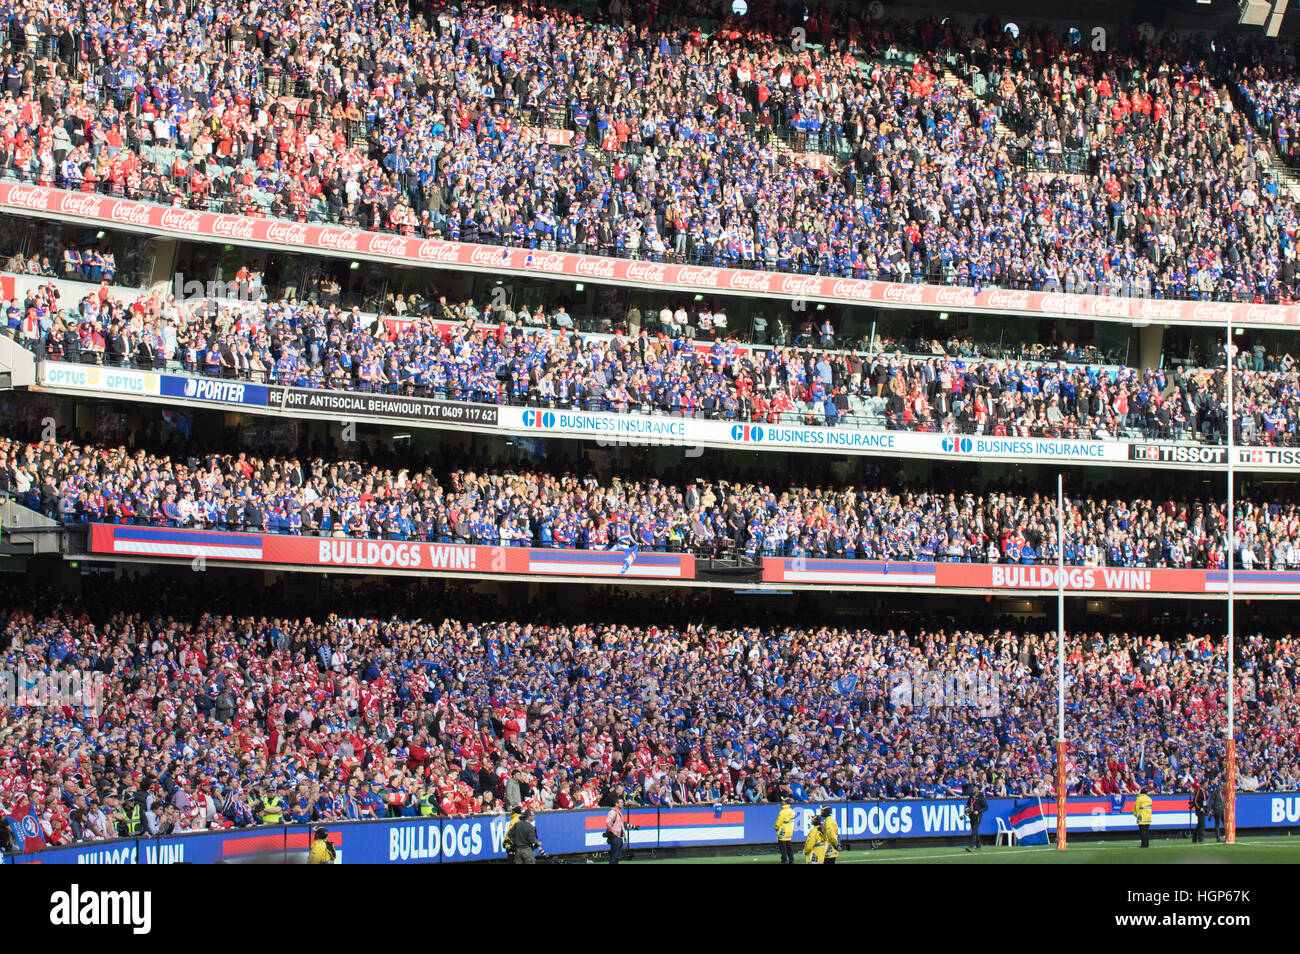 Grand stand crowd at Melbourne Cricket Ground during an AFL football Grand Final Stock Photo